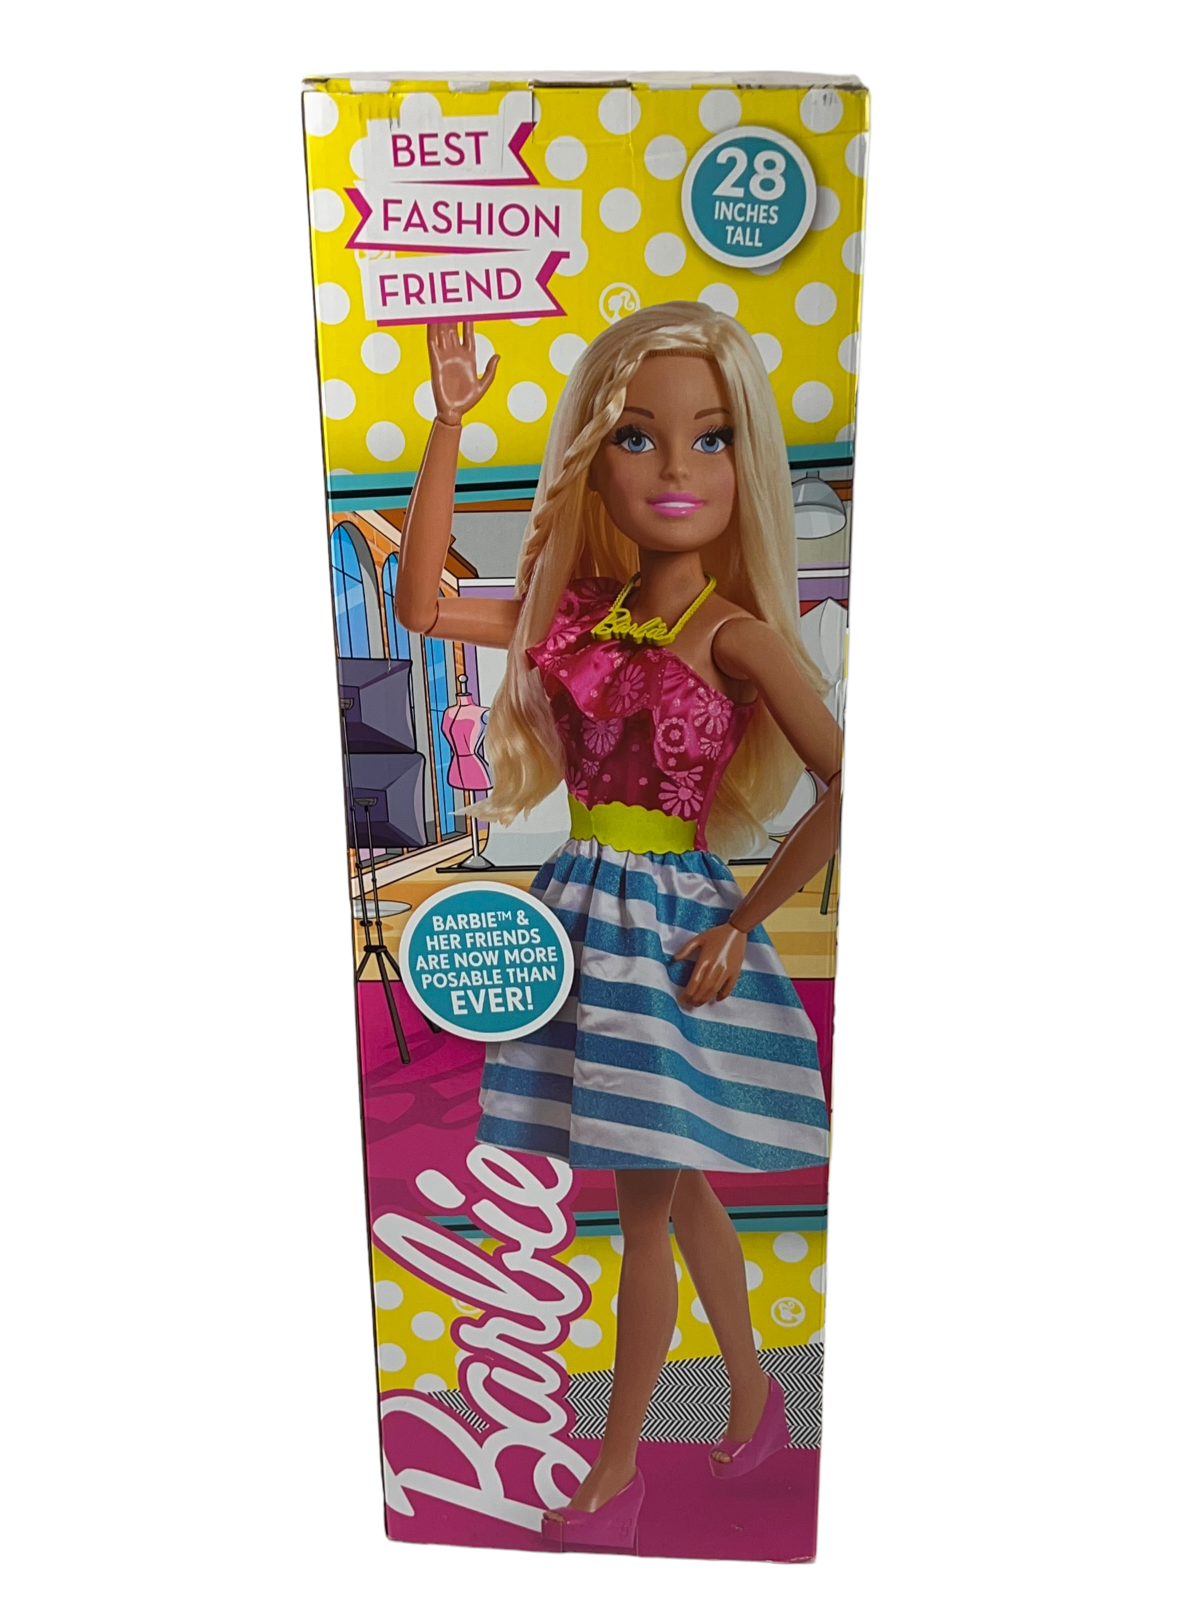 Barbie 28"  Best Fashion Friend Doll Just Play  Blonde Hair New in Box #83902